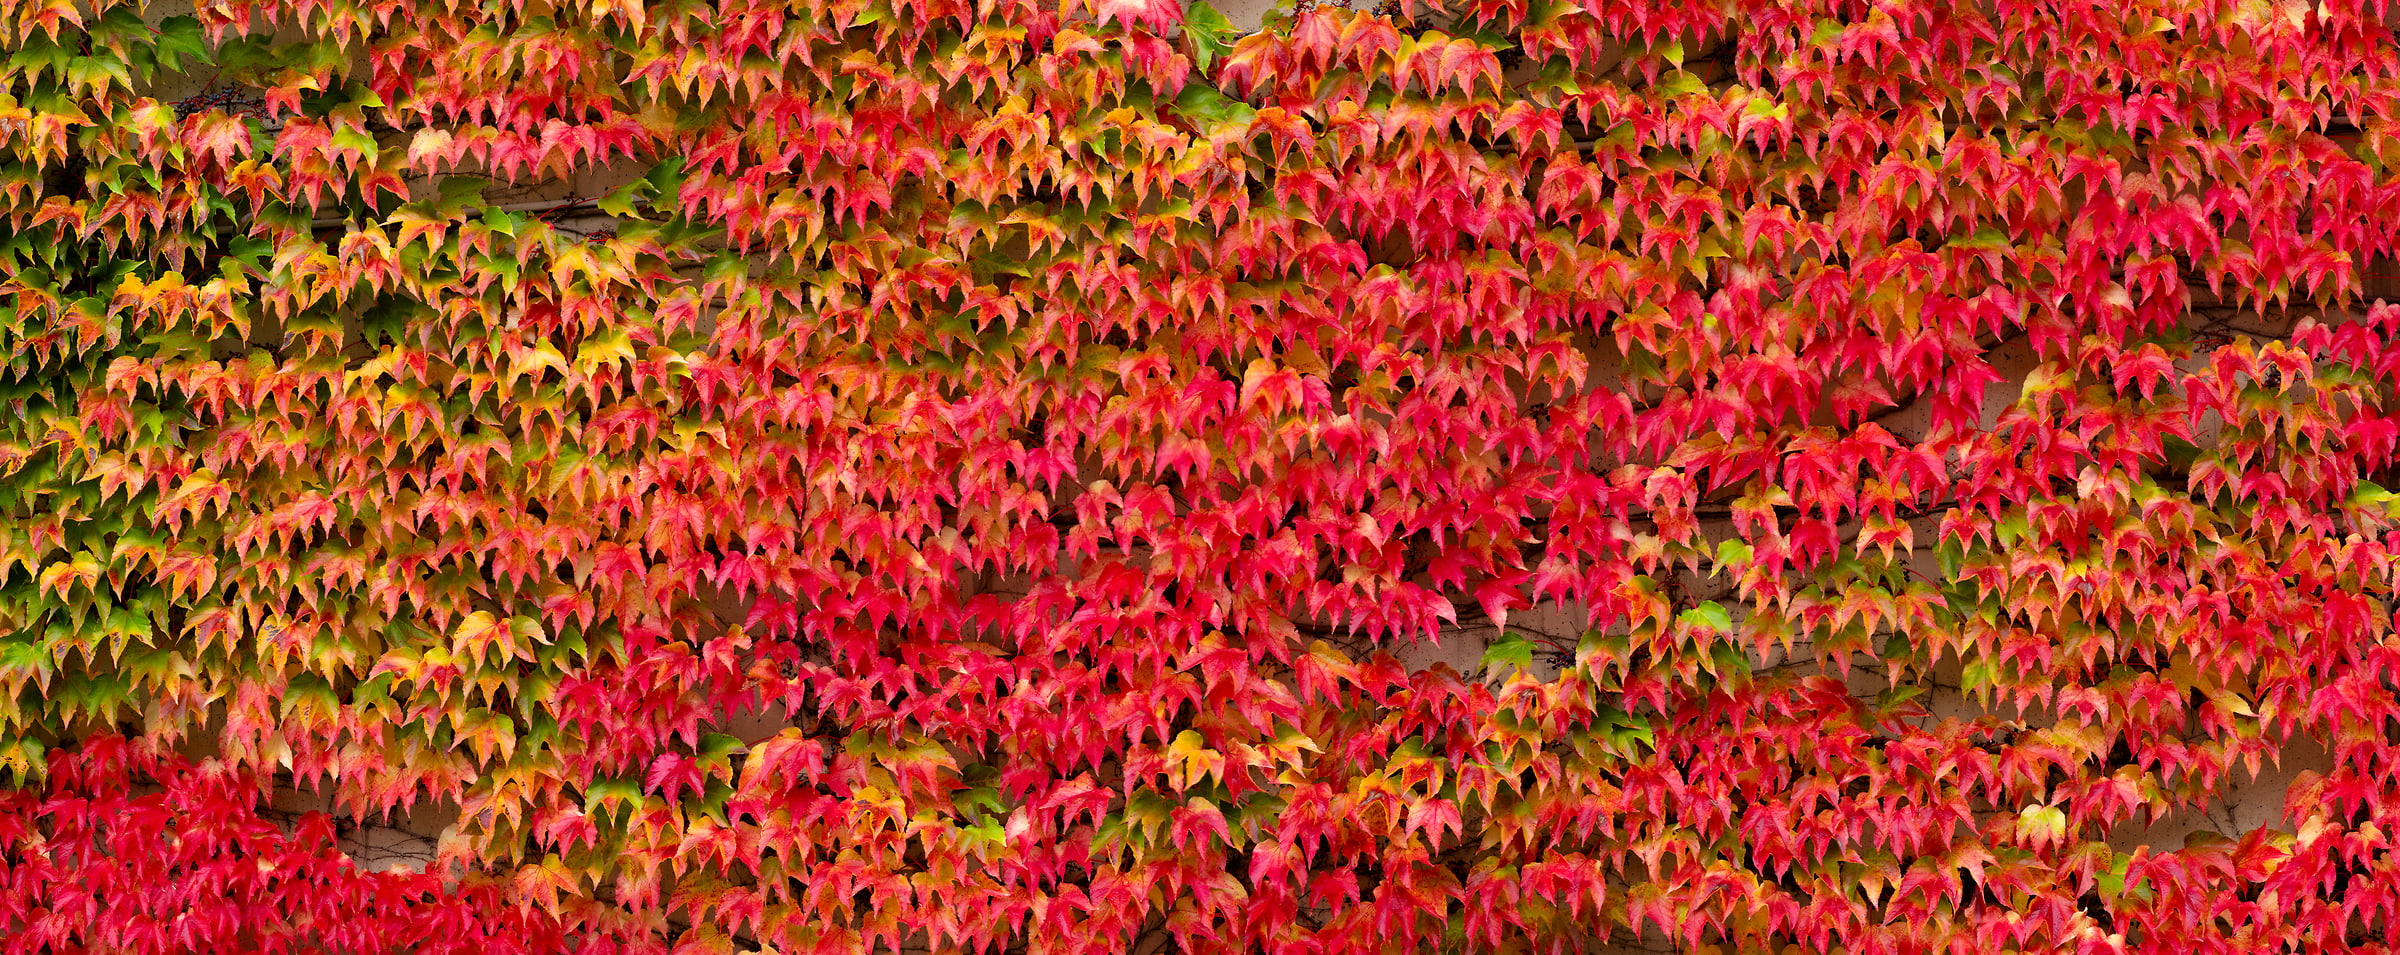 178 megapixels! A very high resolution, large-format VAST photo print of red leaves; nature photograph created by Greg Probst.